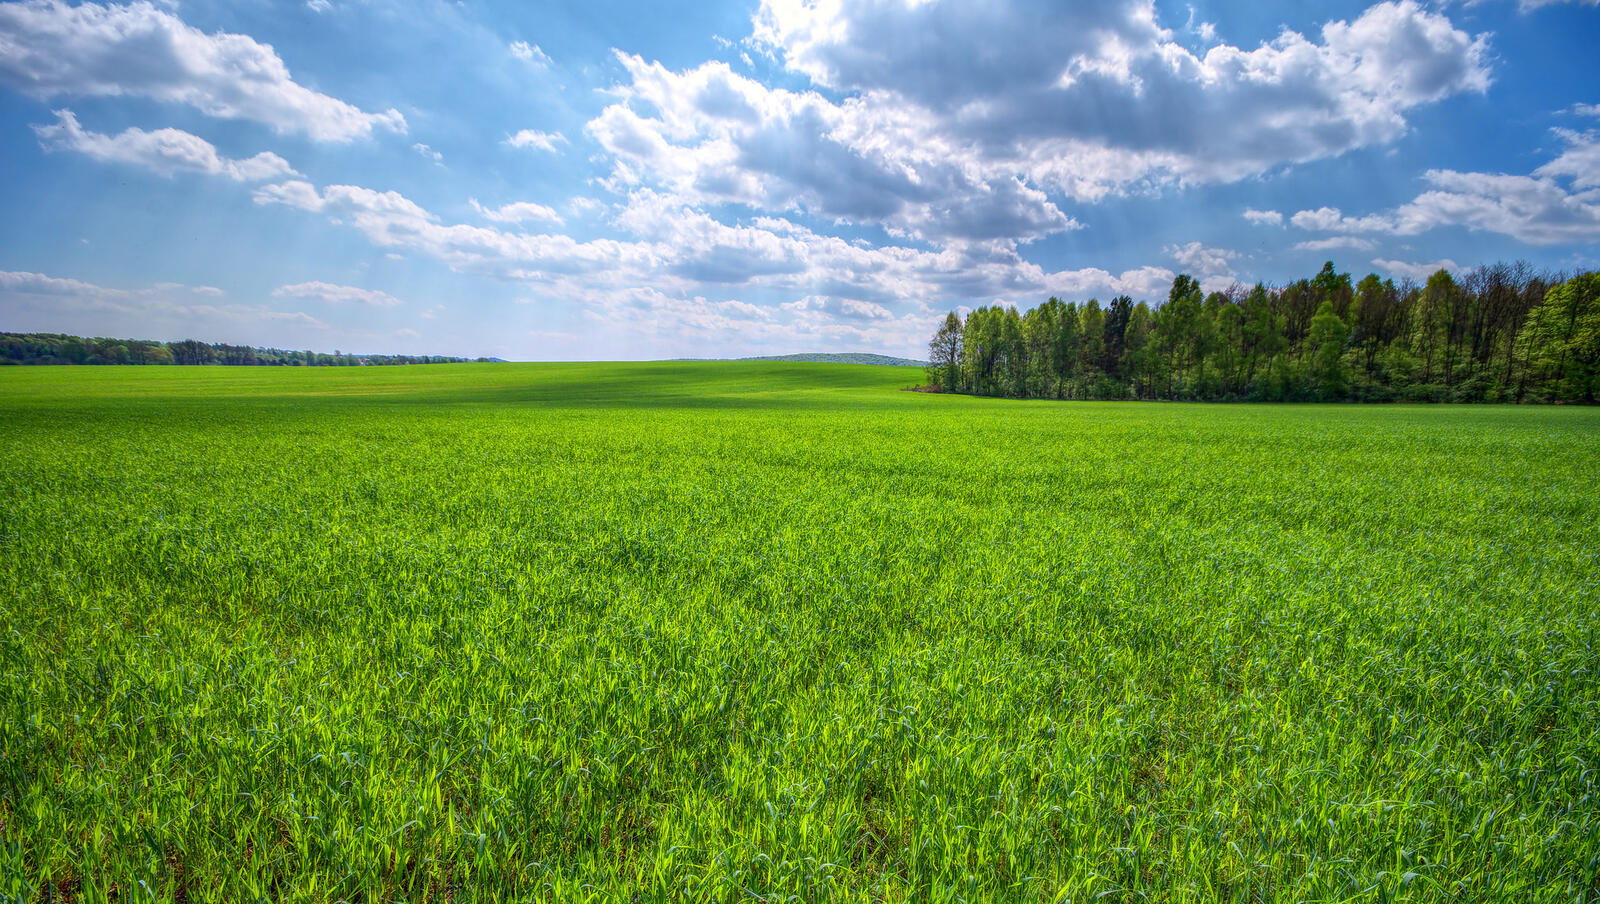 Wallpapers green field landscapes trees on the desktop